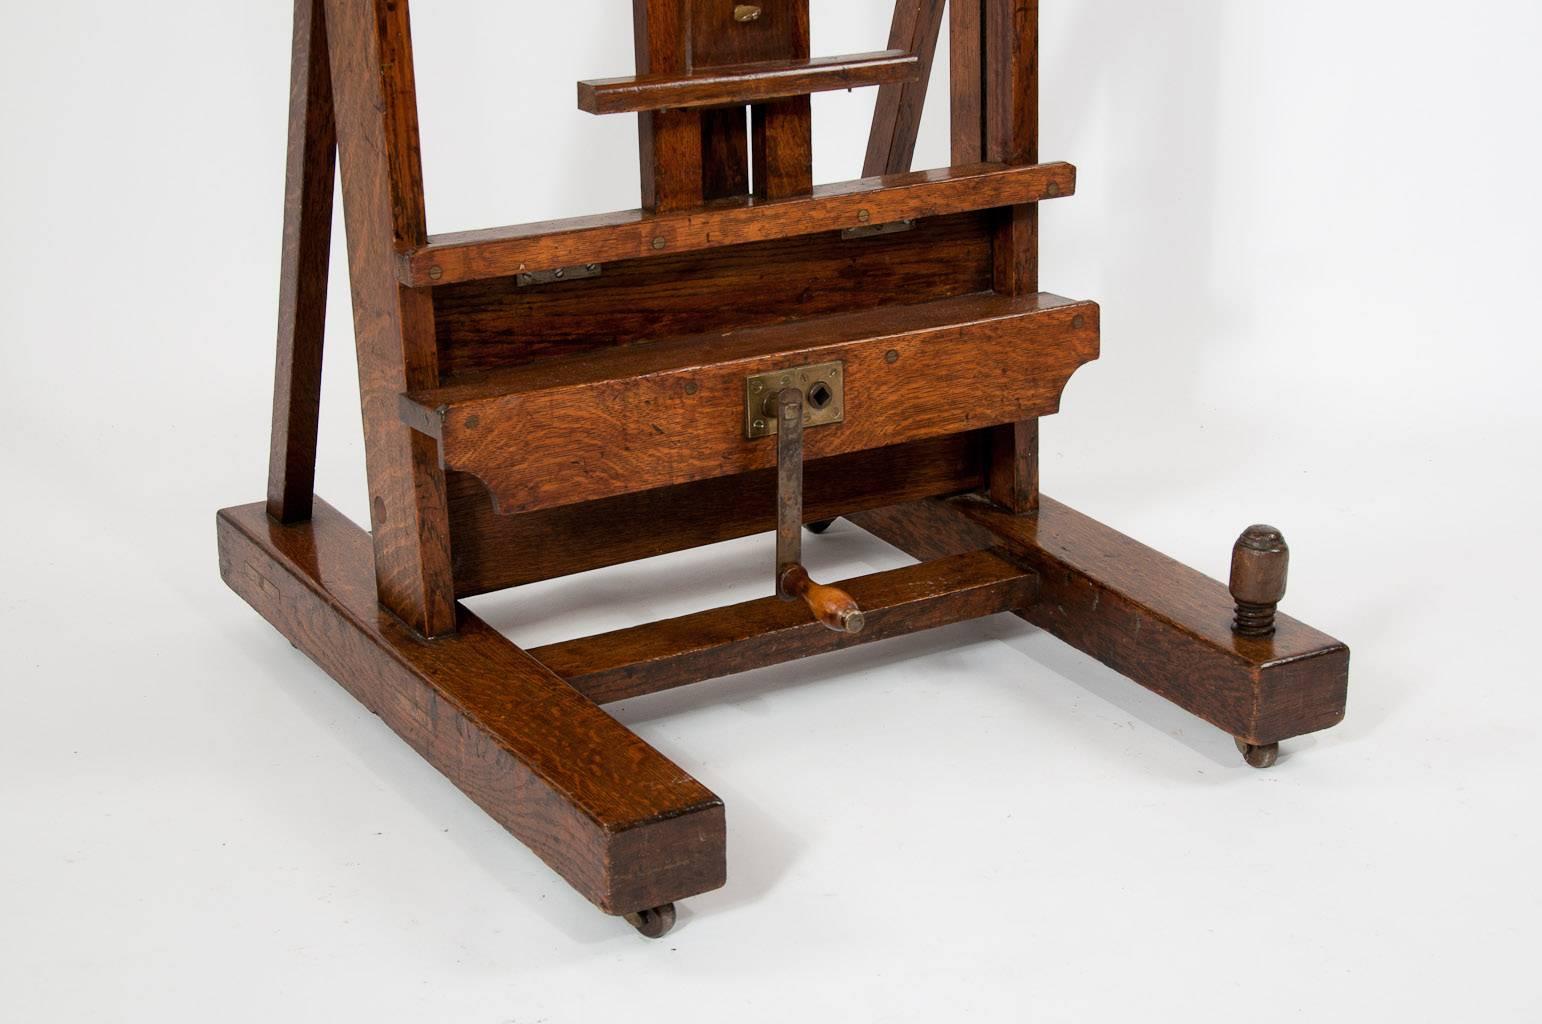 A fantastic quality large oak studio easel by the famous firm Winsor and Newton from London. In lovely condition this large adjustable oak easel has it's original winding handle and makers plate inset 